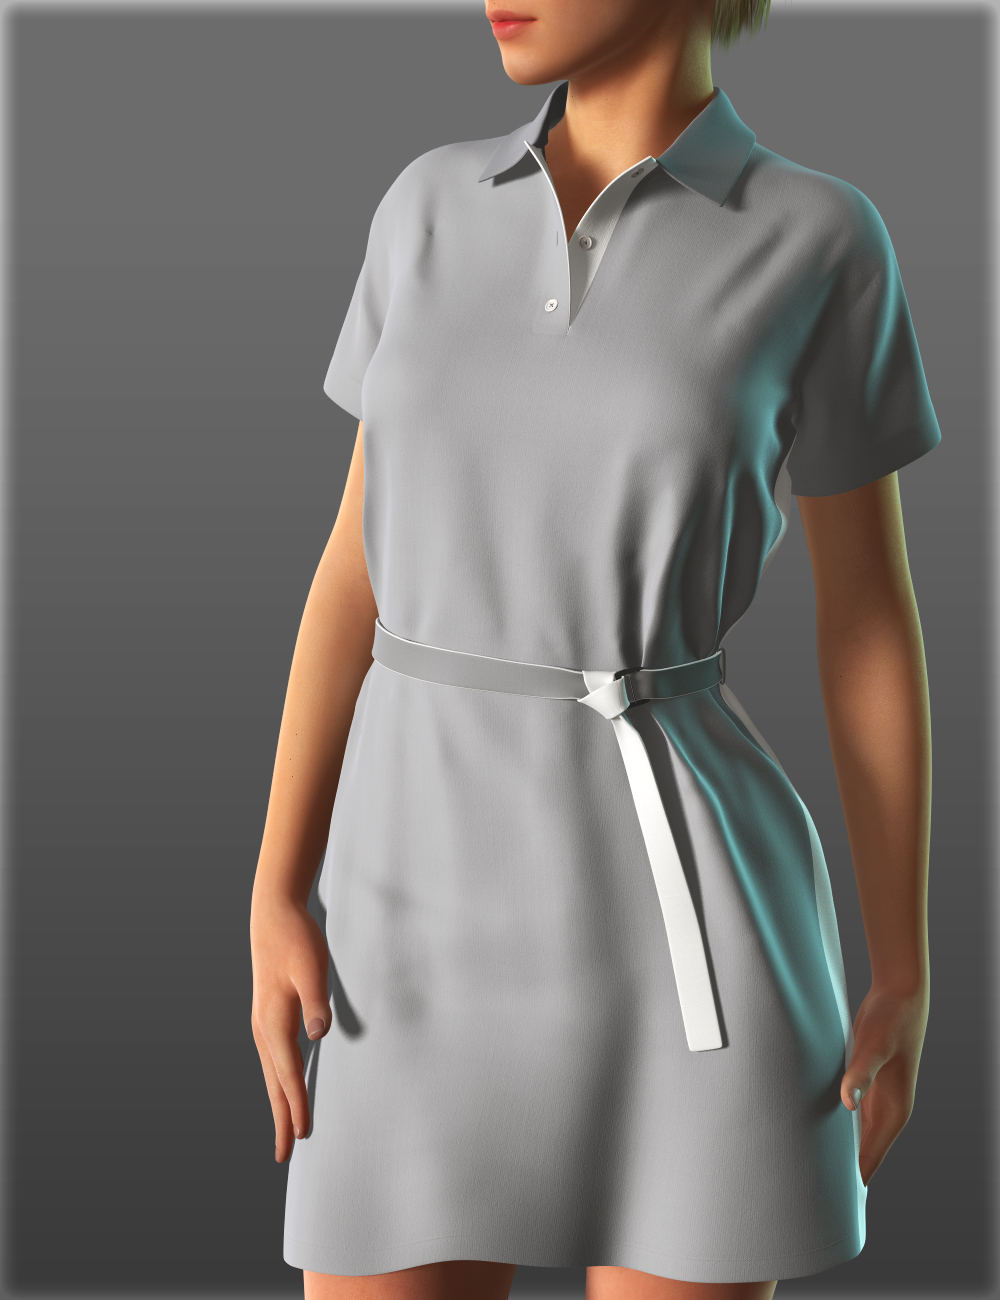 Short Sleeve Shirt Dresses for Genesis 2 Female(s) by: IH Kang, 3D Models by Daz 3D